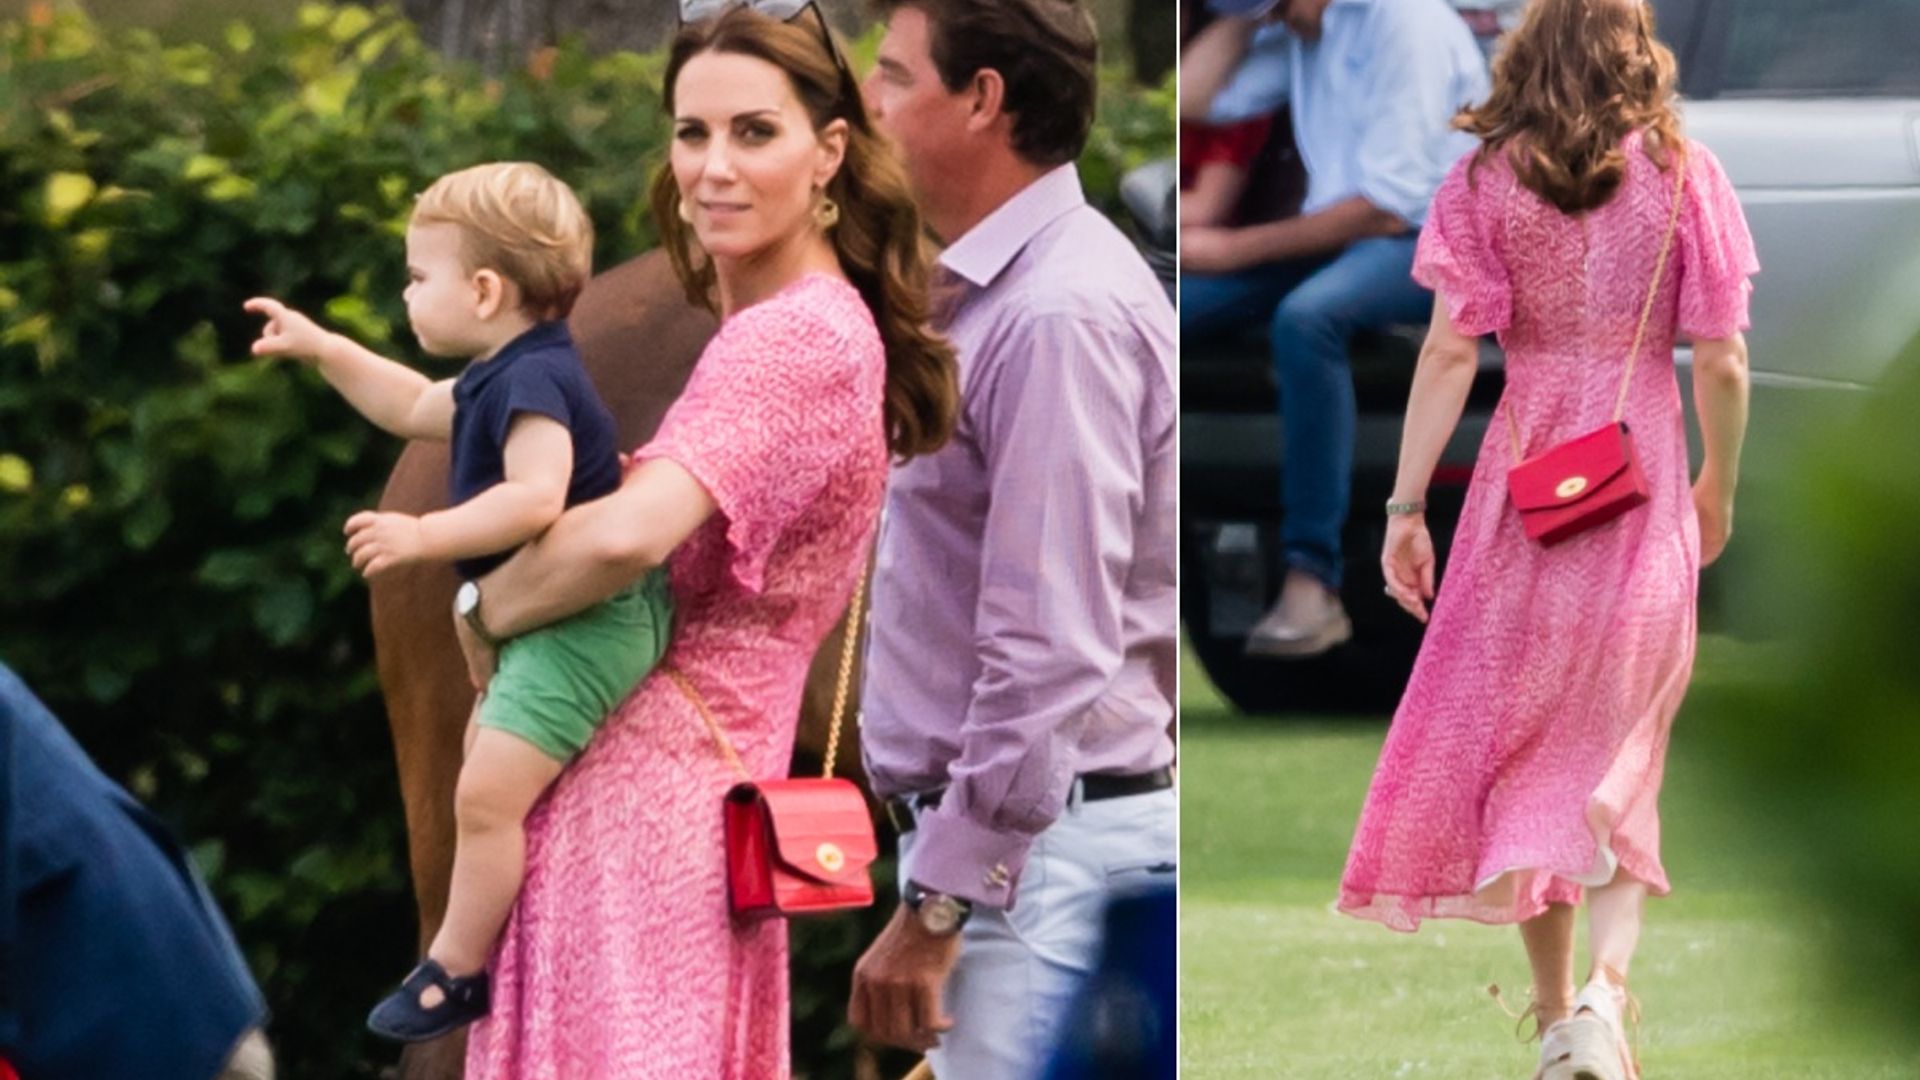 Details on Kate Middleton's Leather Mulberry Handbag - PureWow